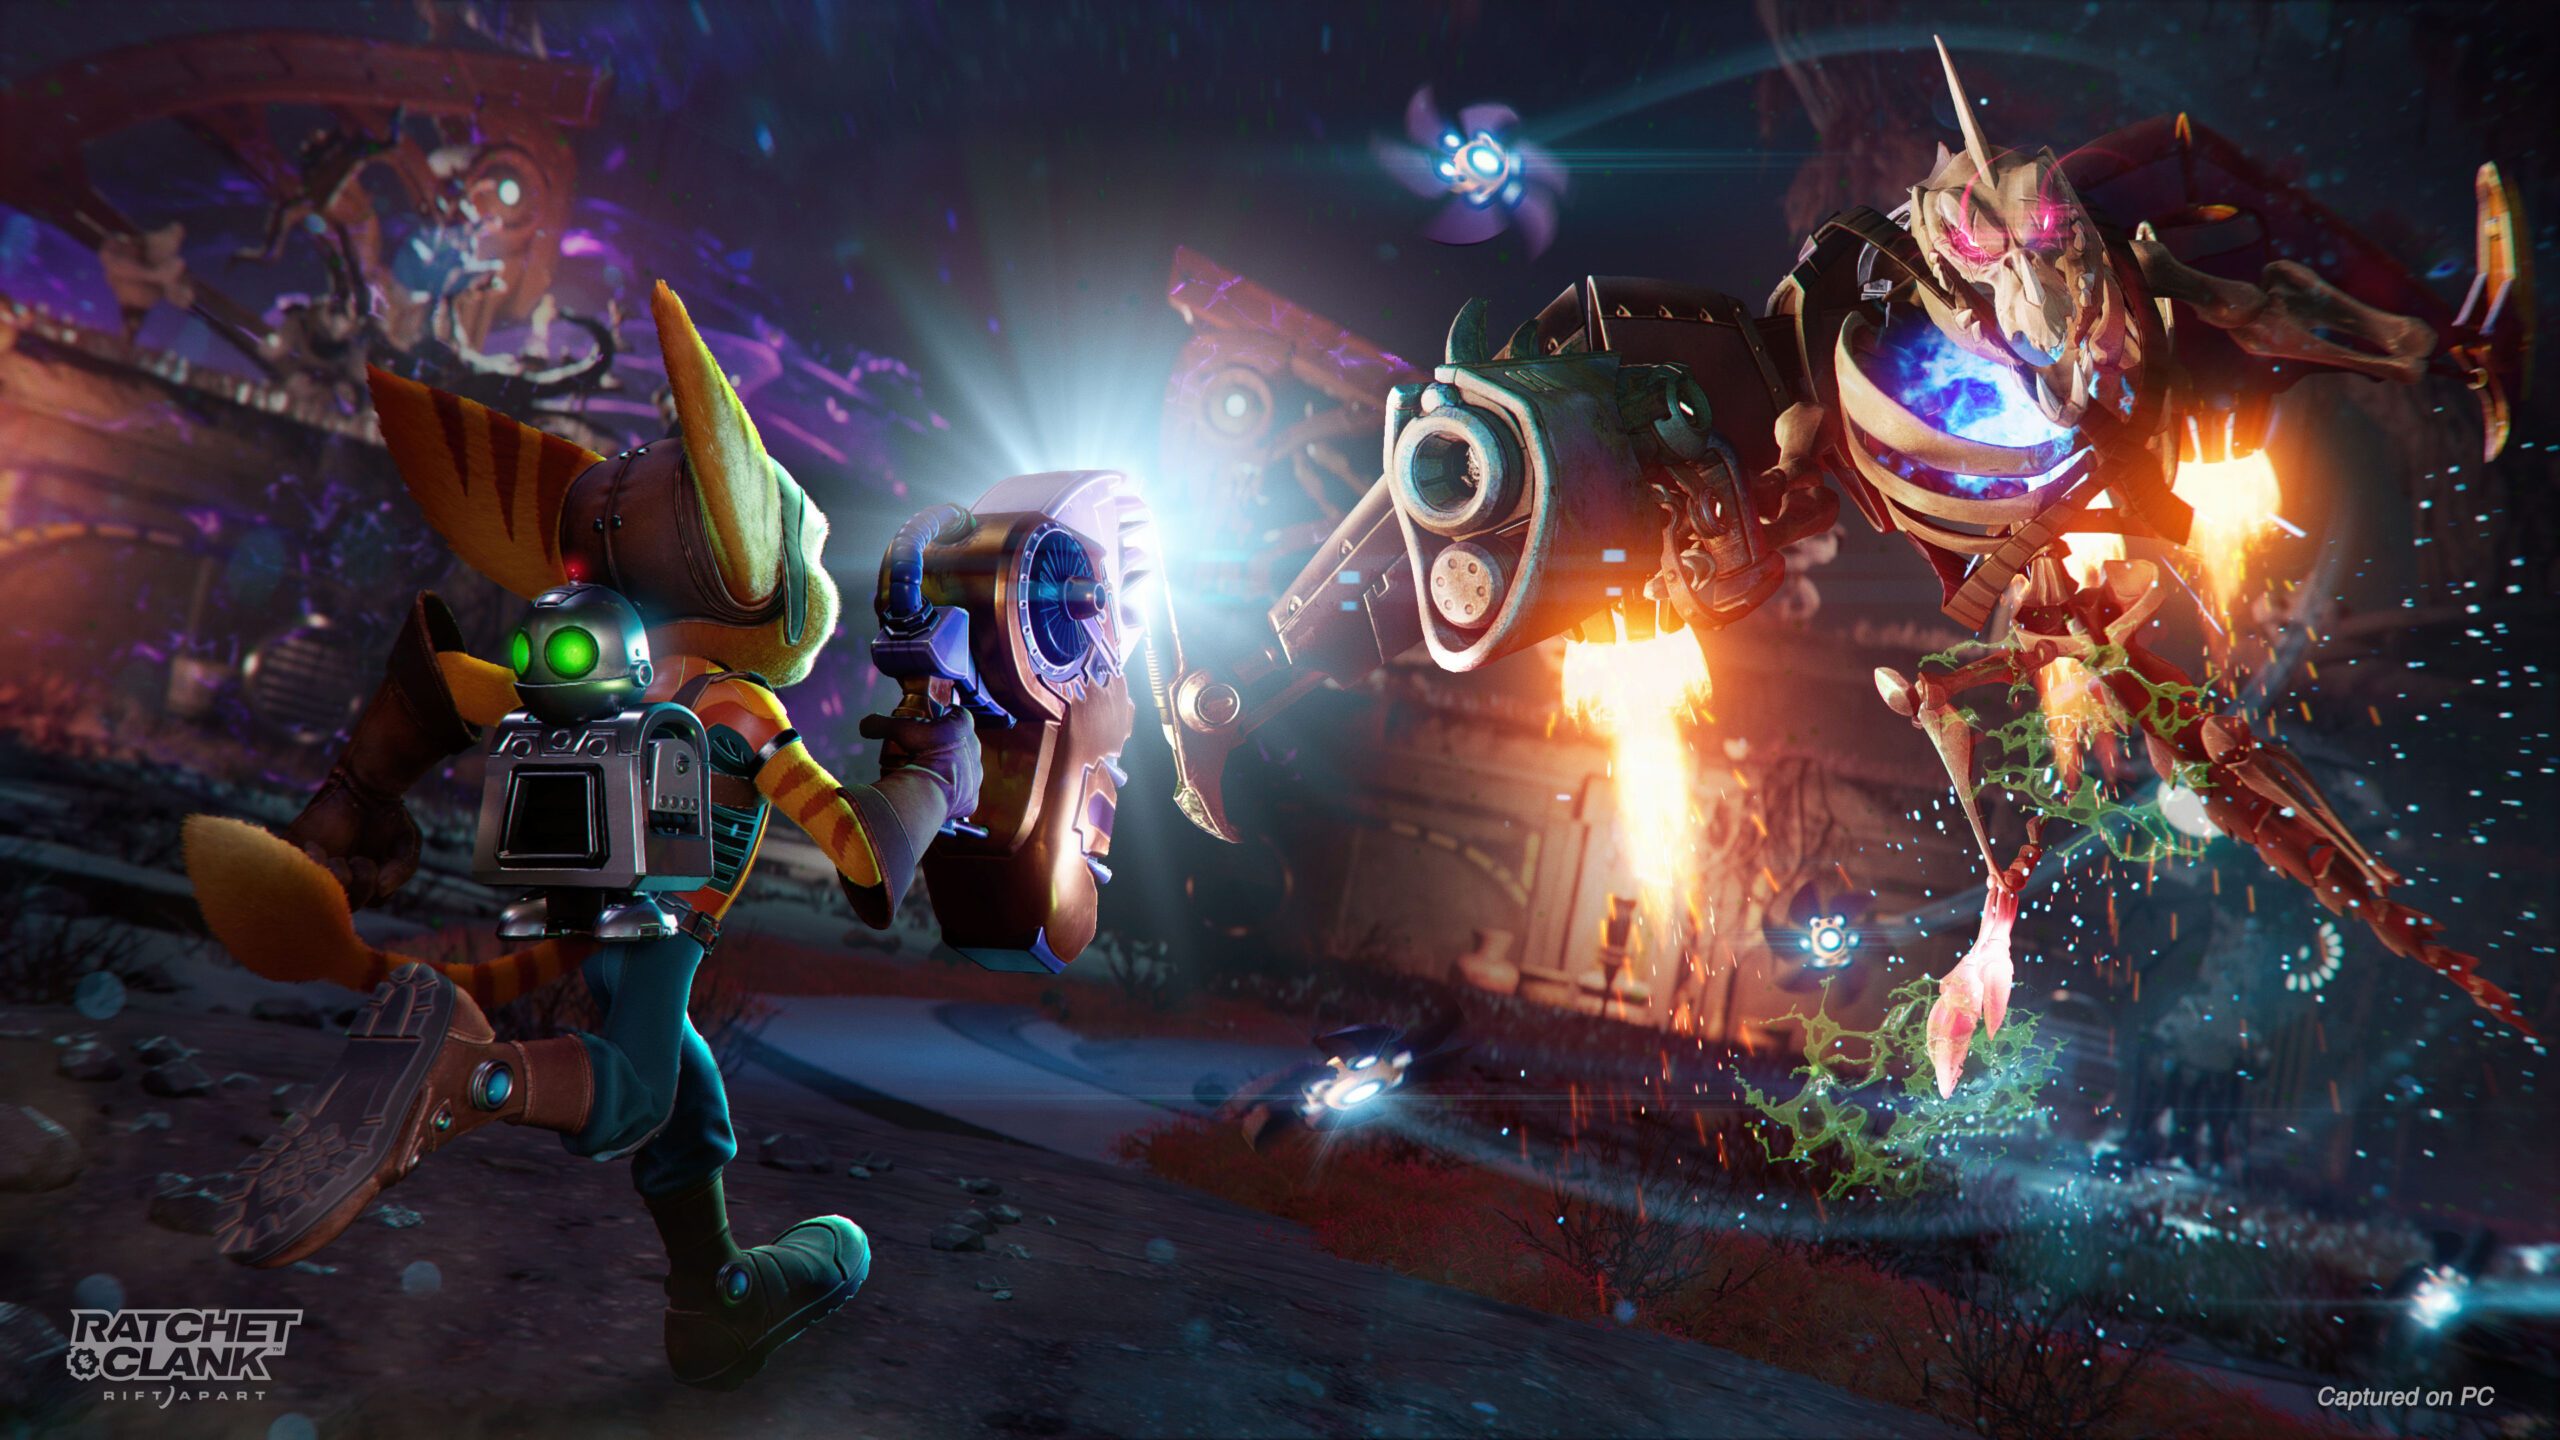 Ratchet & Clank: Rift Apart (for PlayStation 5) Review